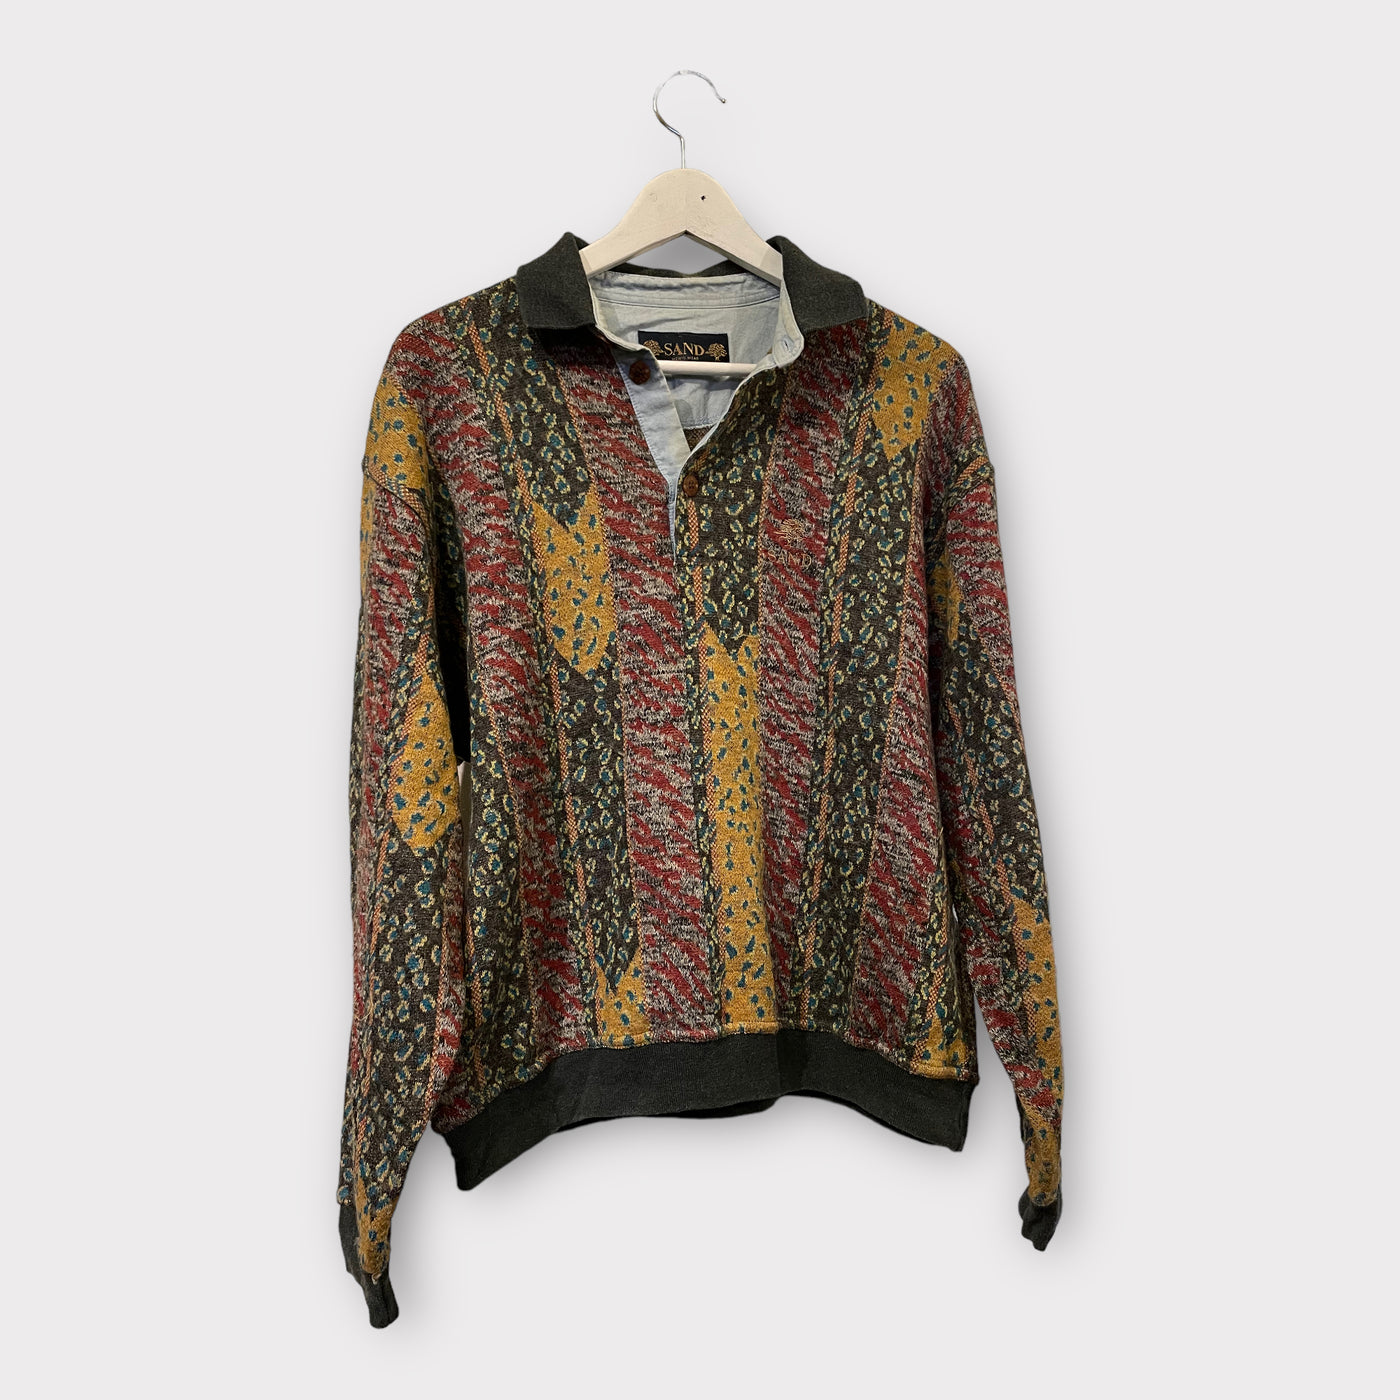 SAND knitted polo long-sleeve in multi-color